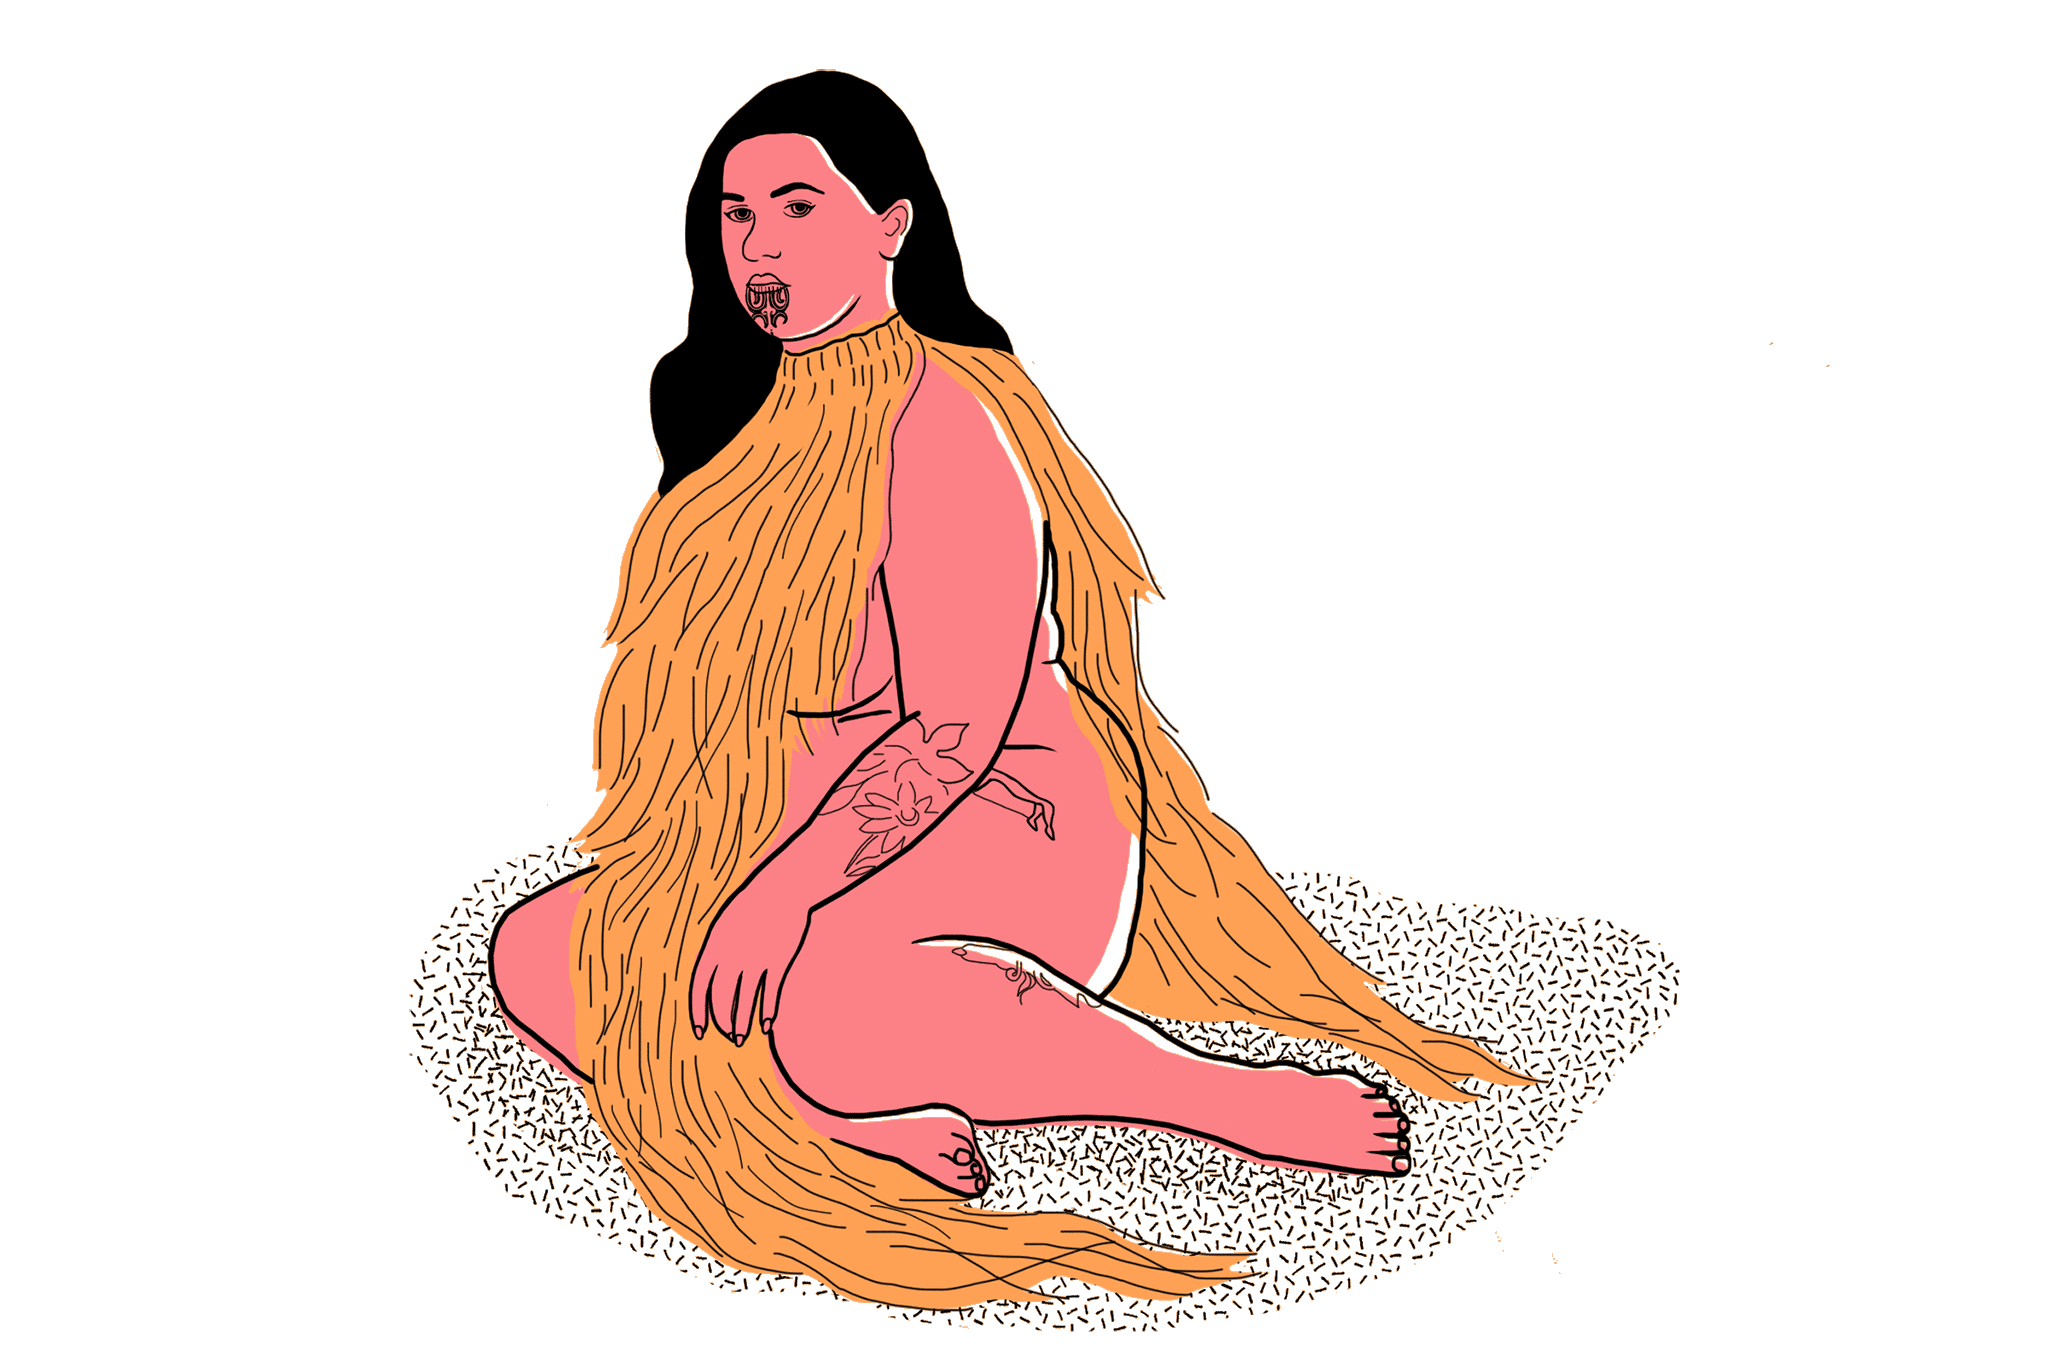 Illustration of a Māori woman with a moko kauae and other tattoos, in pink and orange.